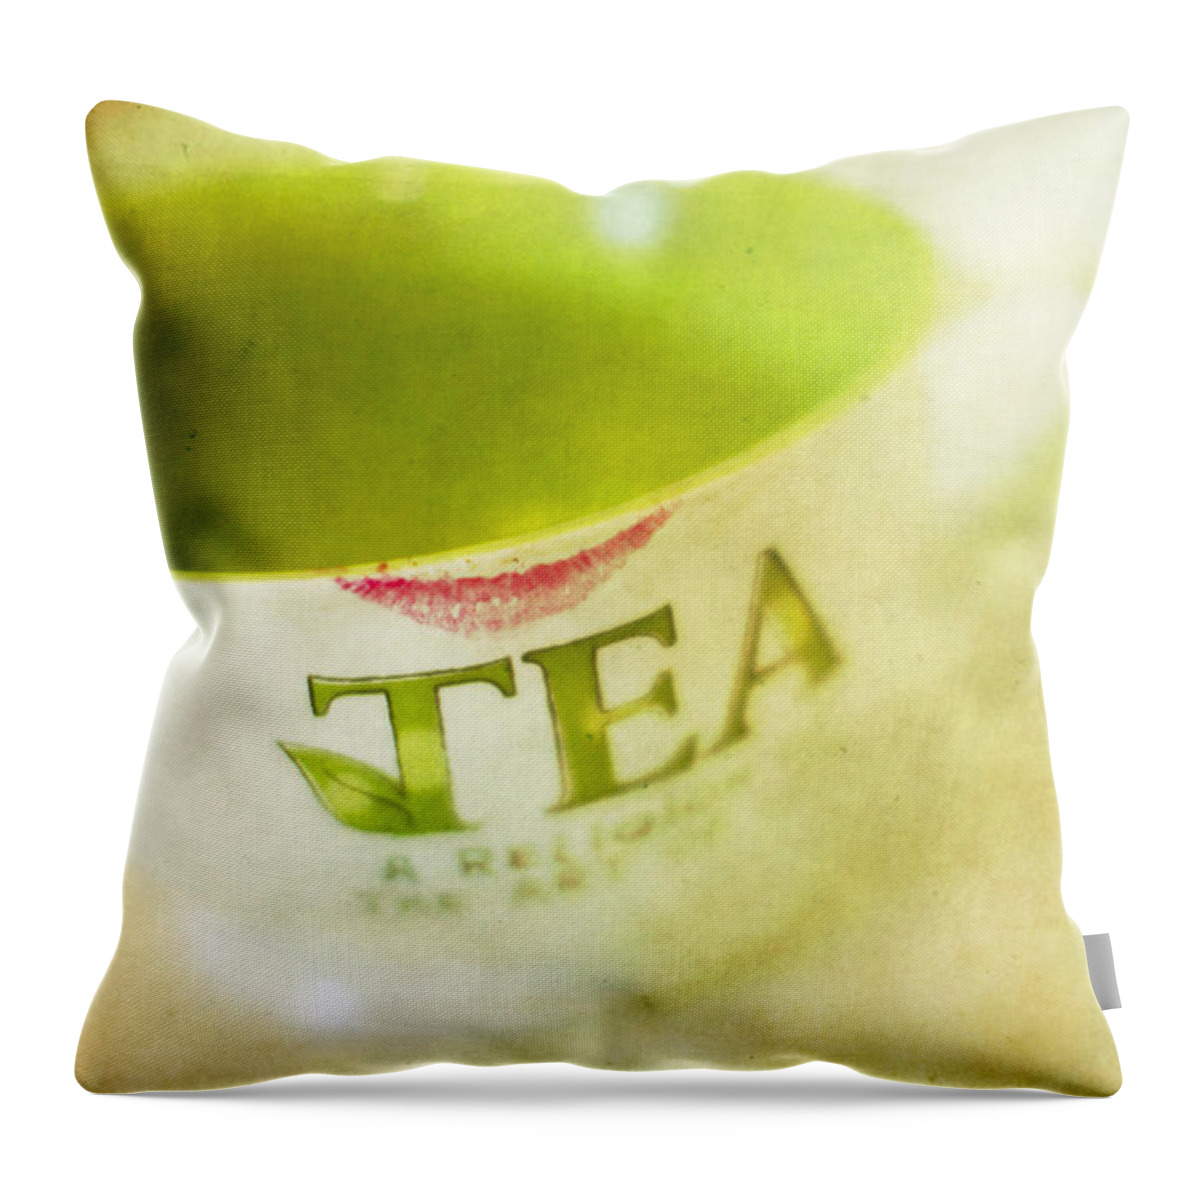 Tea Throw Pillow featuring the photograph My Second Favorite Beverage by Rebecca Cozart